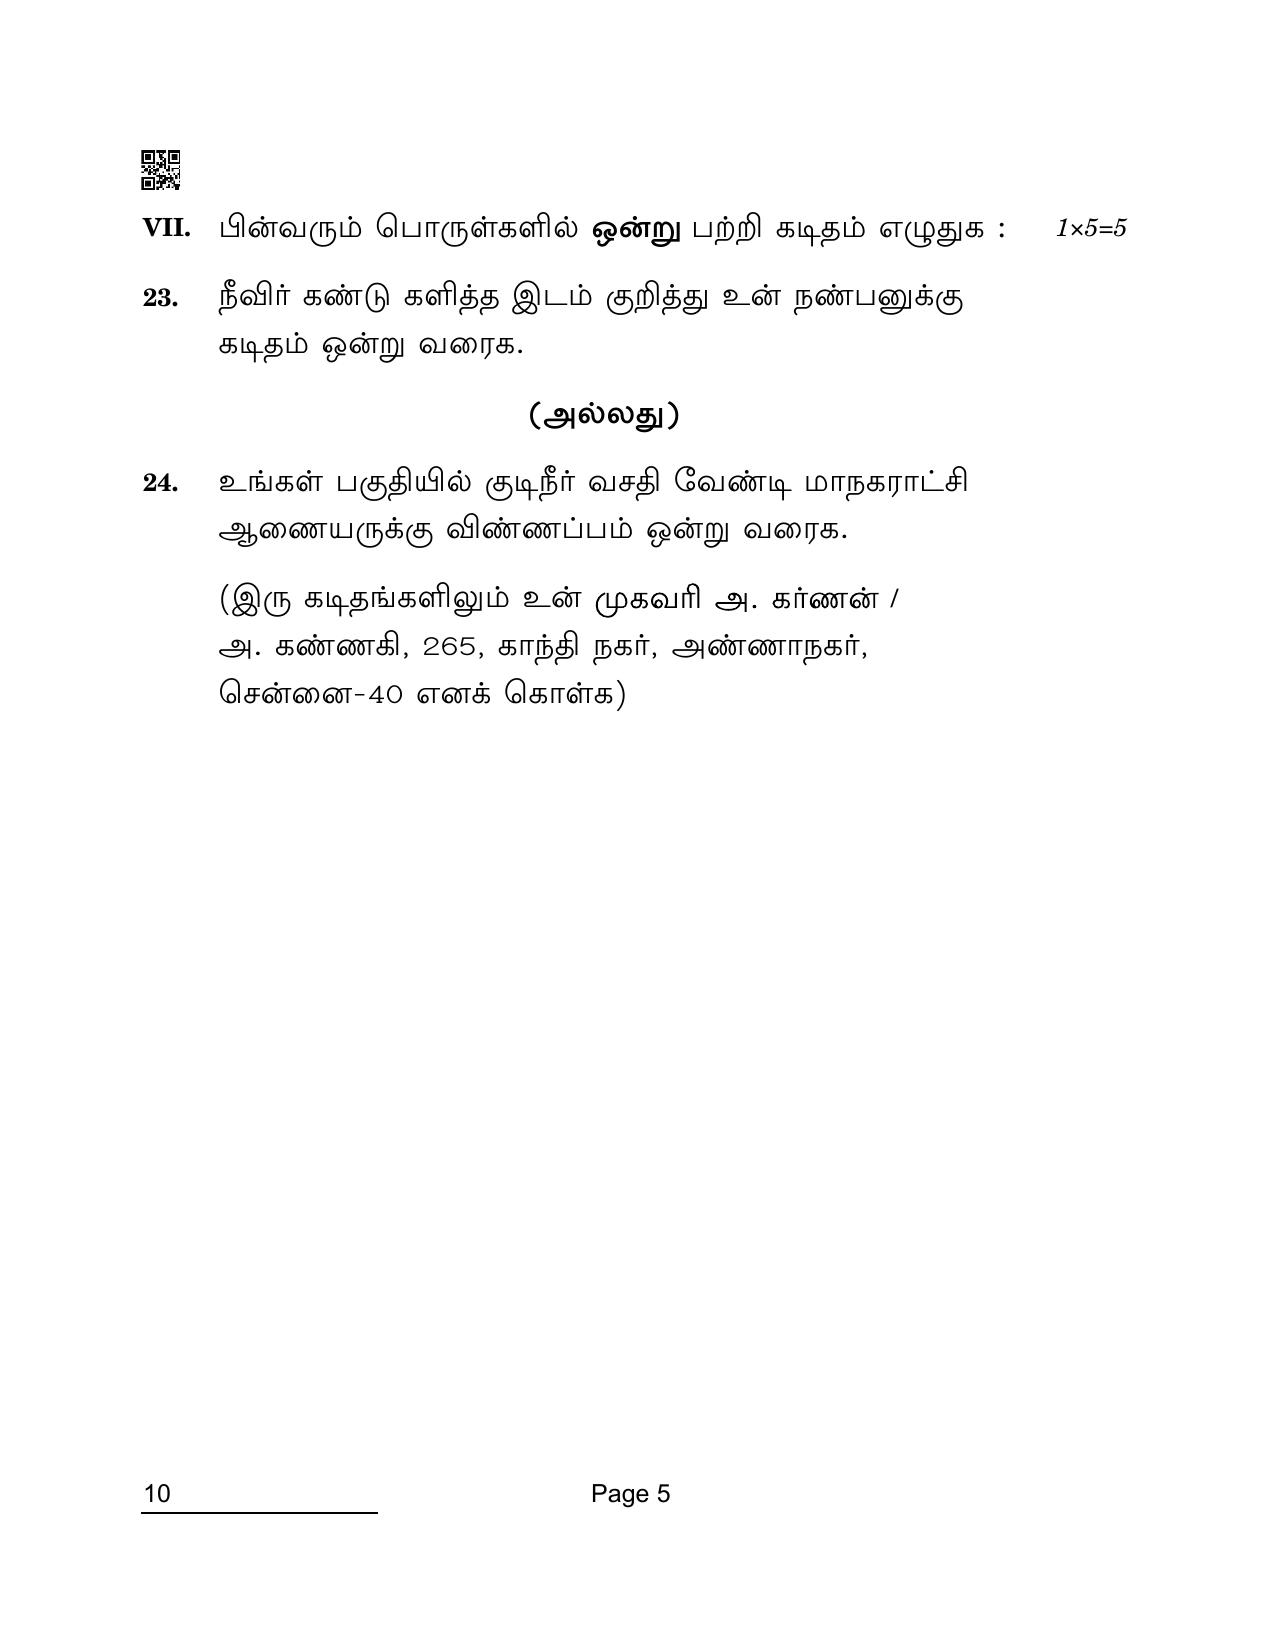 CBSE Class 10 10 Tamil 2022 Compartment Question Paper - Page 5